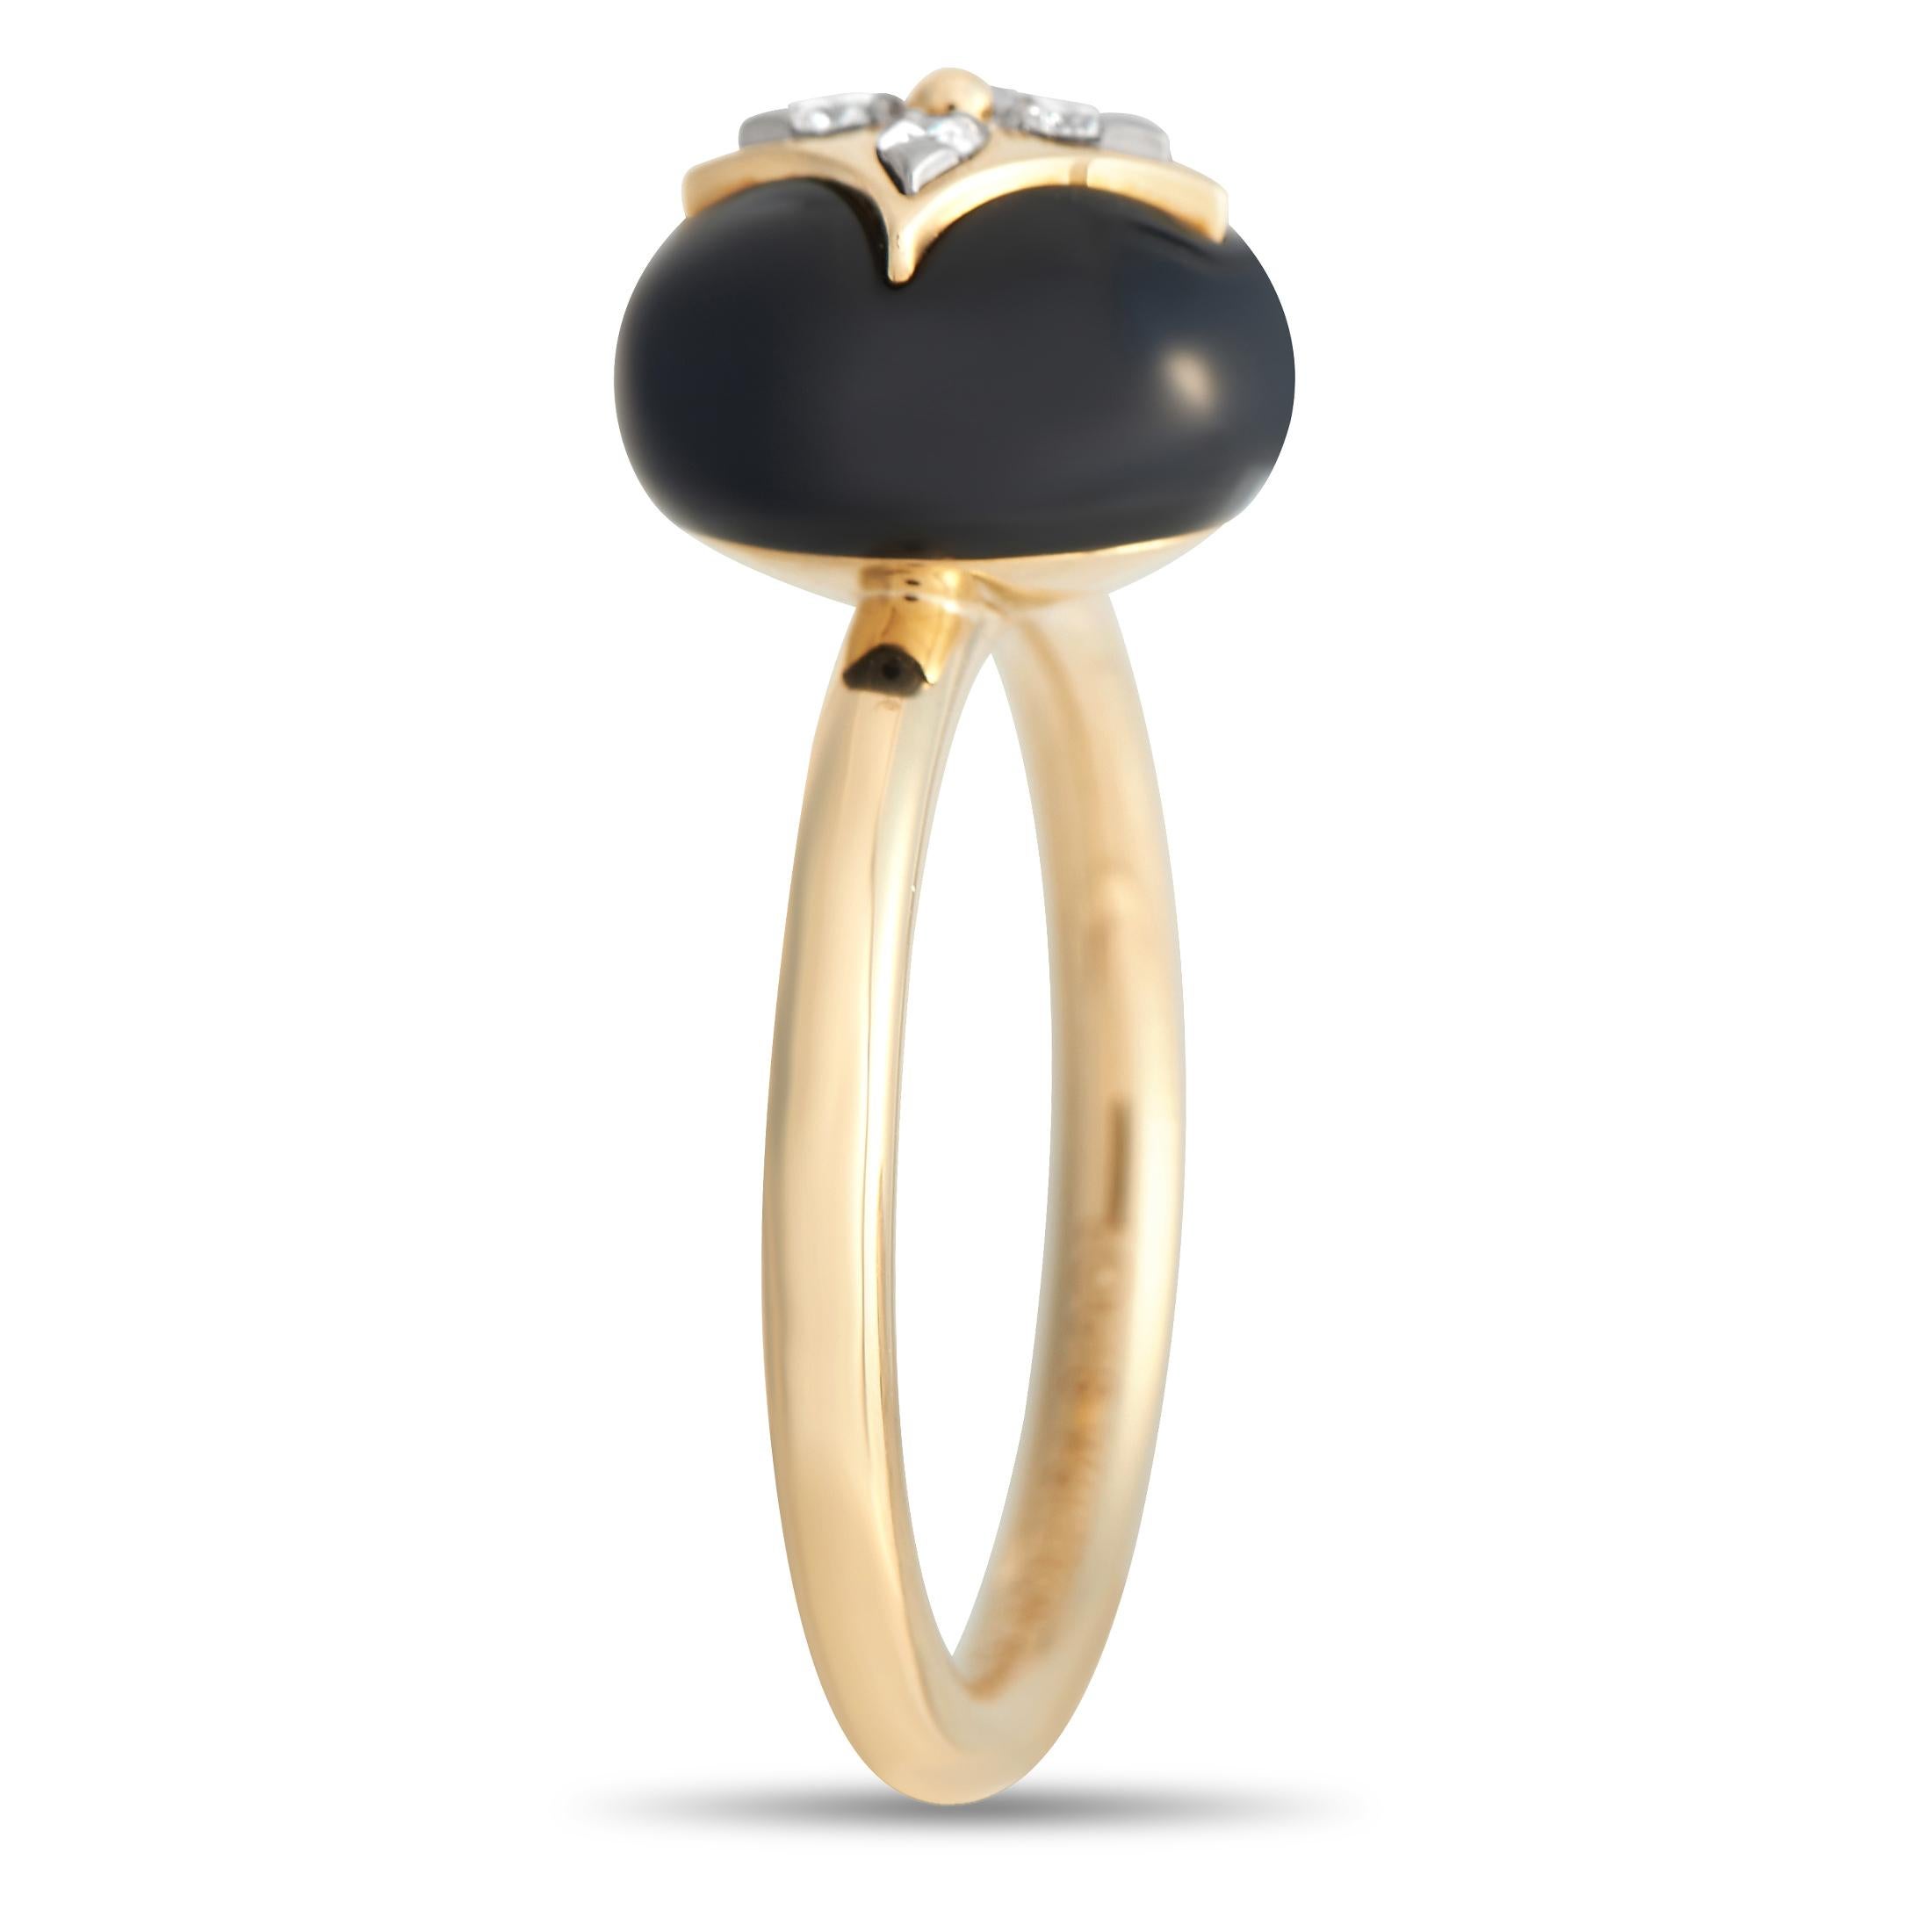 There’s something classic and elegant about this Louis Vuitton Blossom ring. An onyx orb makes a statement at the center. It beautifully showcases this ring's sparkling inset Diamonds and an engraving of the brand’s iconic motif. Incredibly